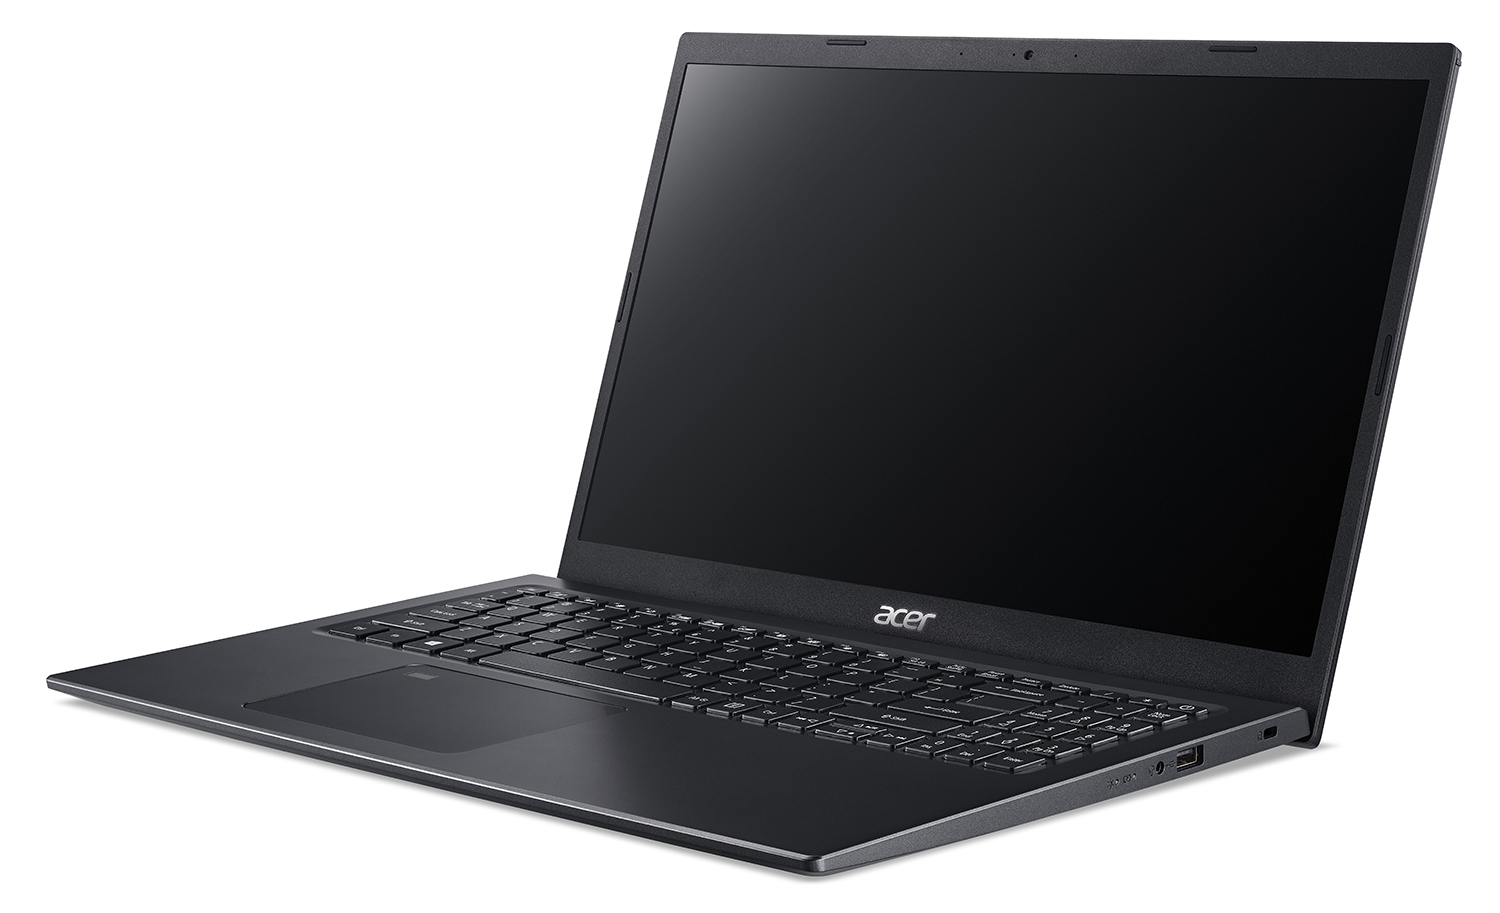 Acer travelmate p215. Acer TRAVELMATE i5. Ноутбук Acer TRAVELMATE p2. Acer TRAVELMATE p2 tmp2510-g2-MG. Acer tmp2510.